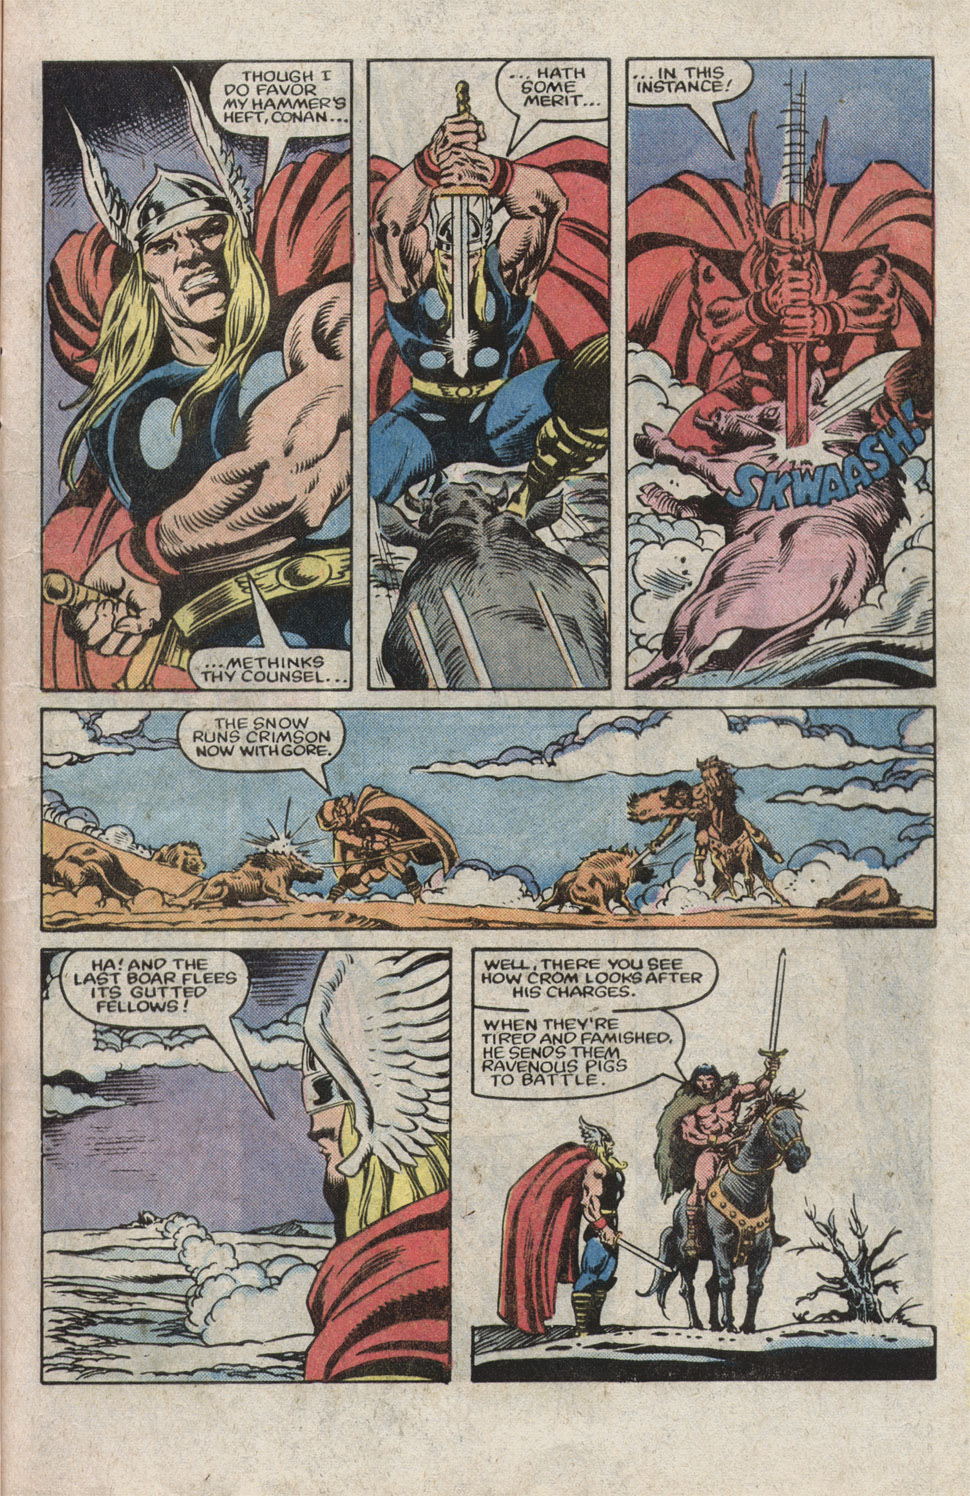 What If? (1977) issue 39 - Thor battled conan - Page 21